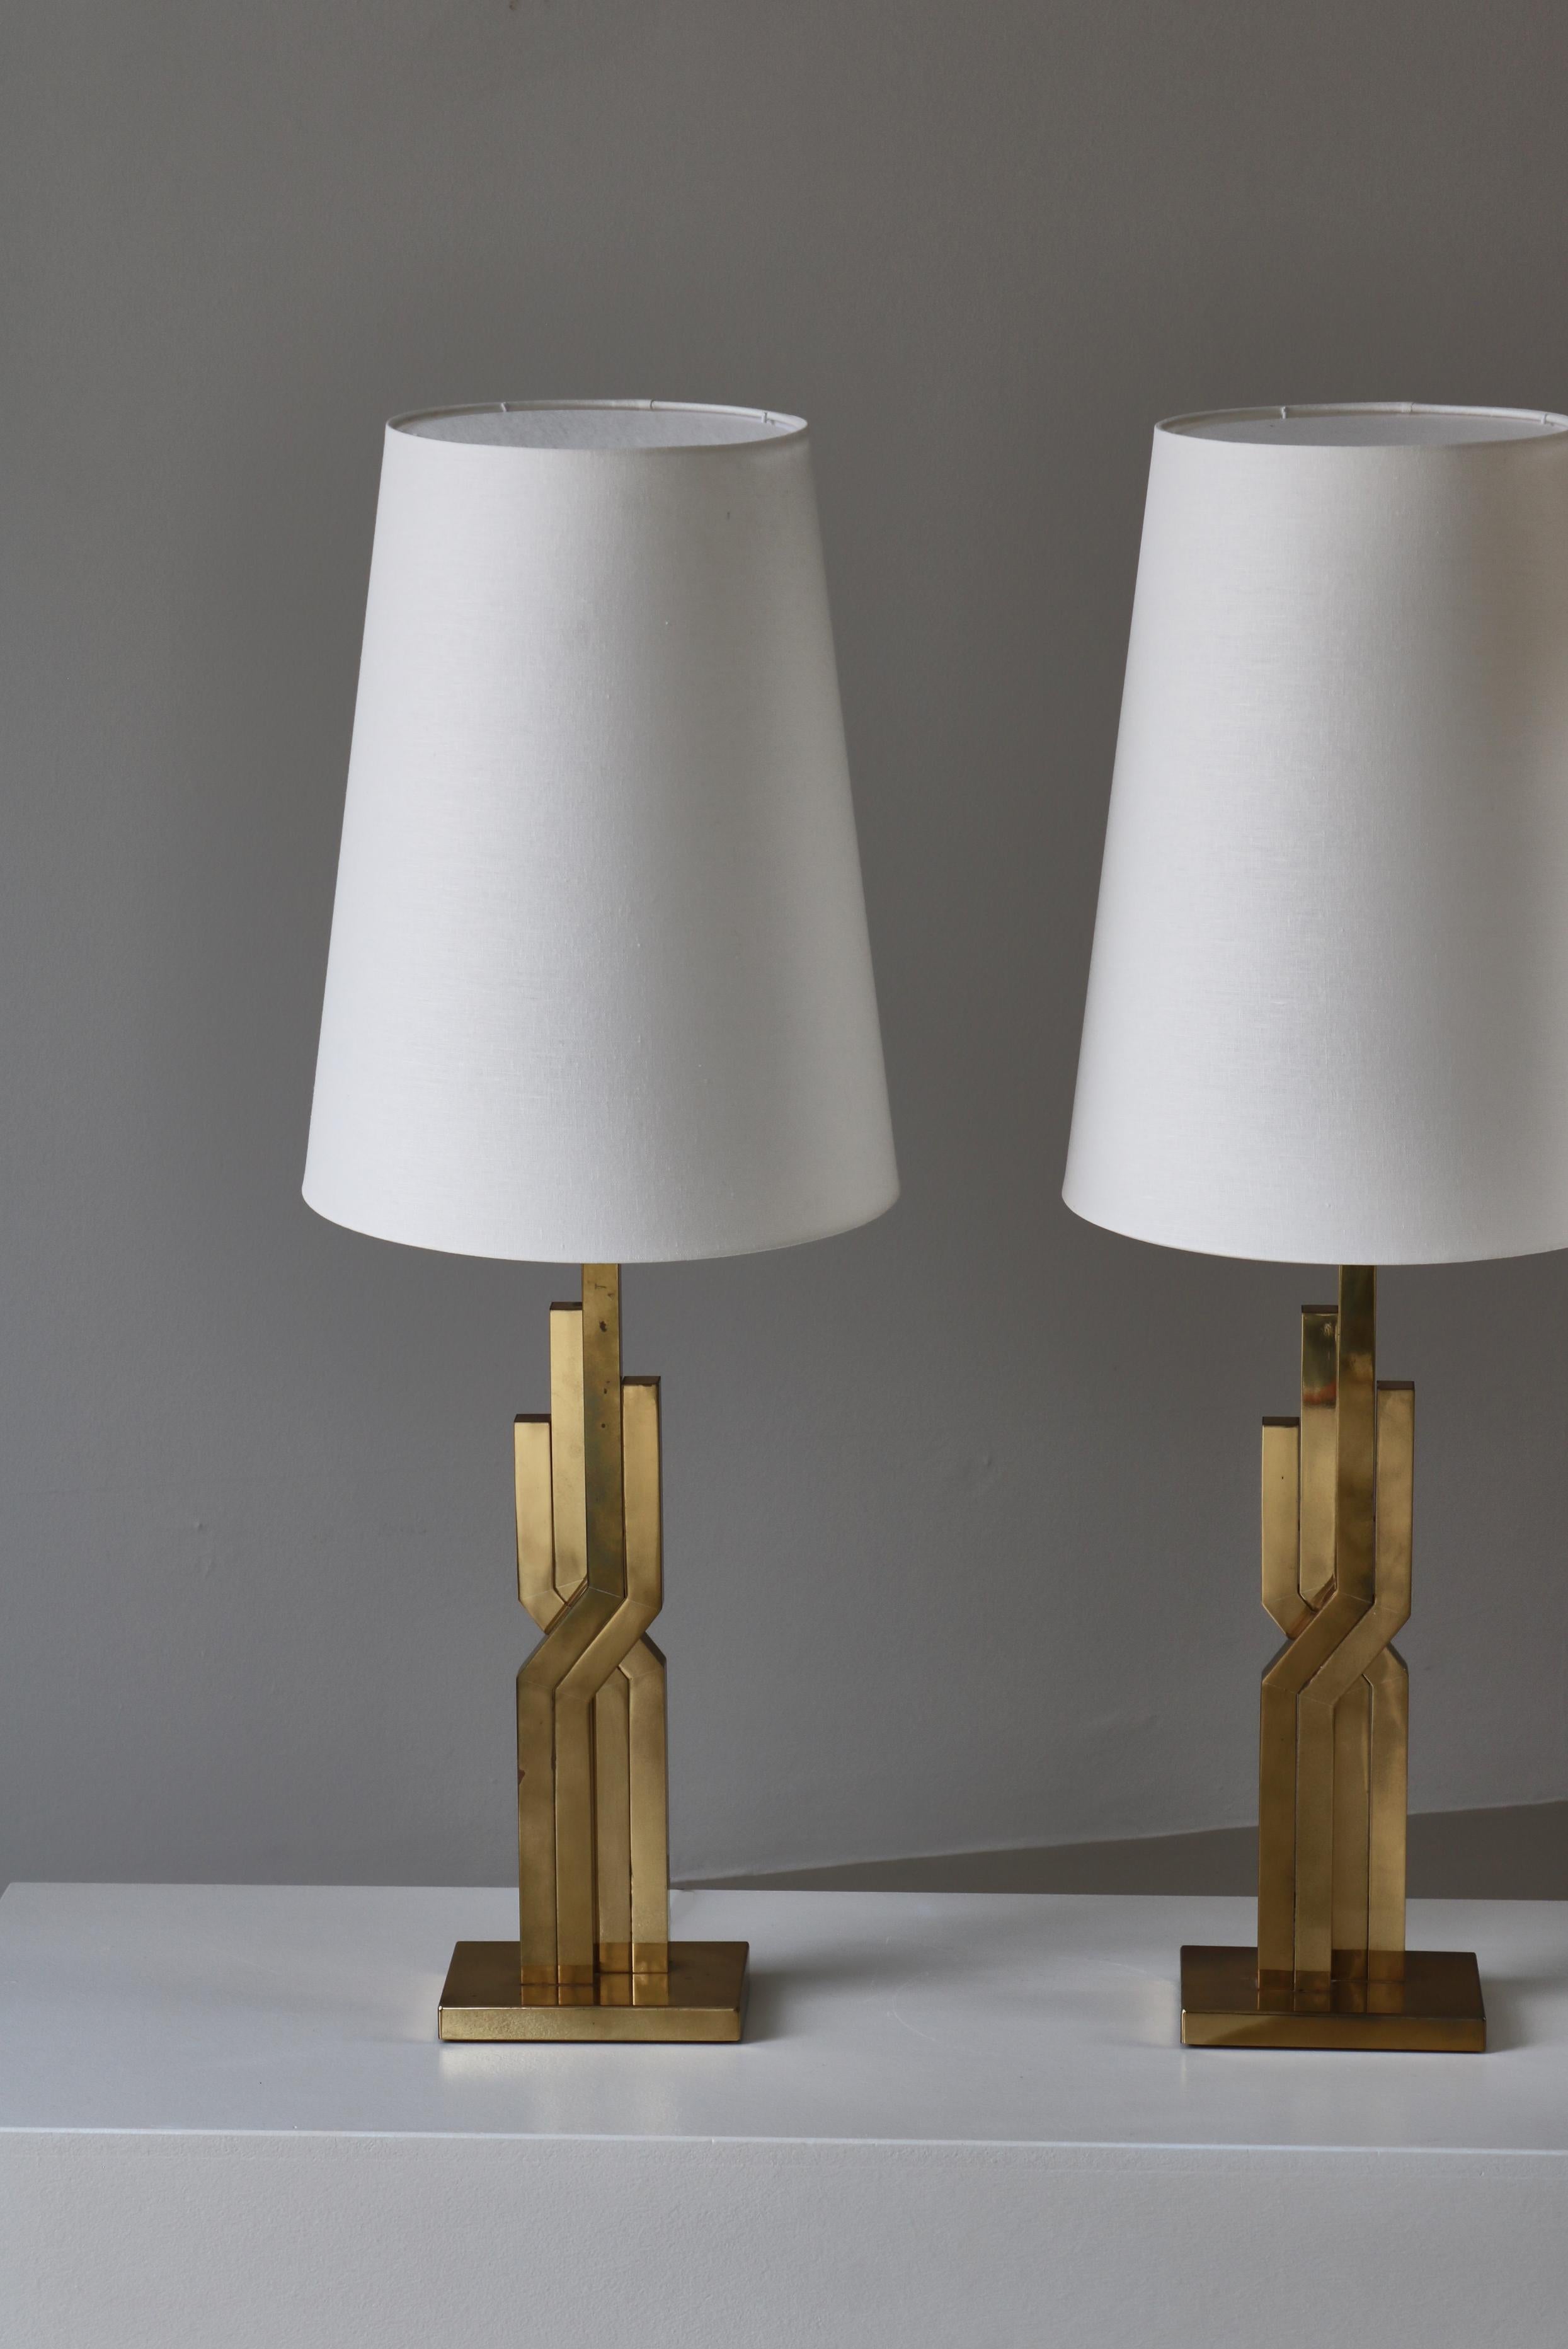 Mid-20th Century Large Danish Modern Table Lamps in Brass by Svend Aage Holm-Sørensen, 1960s For Sale